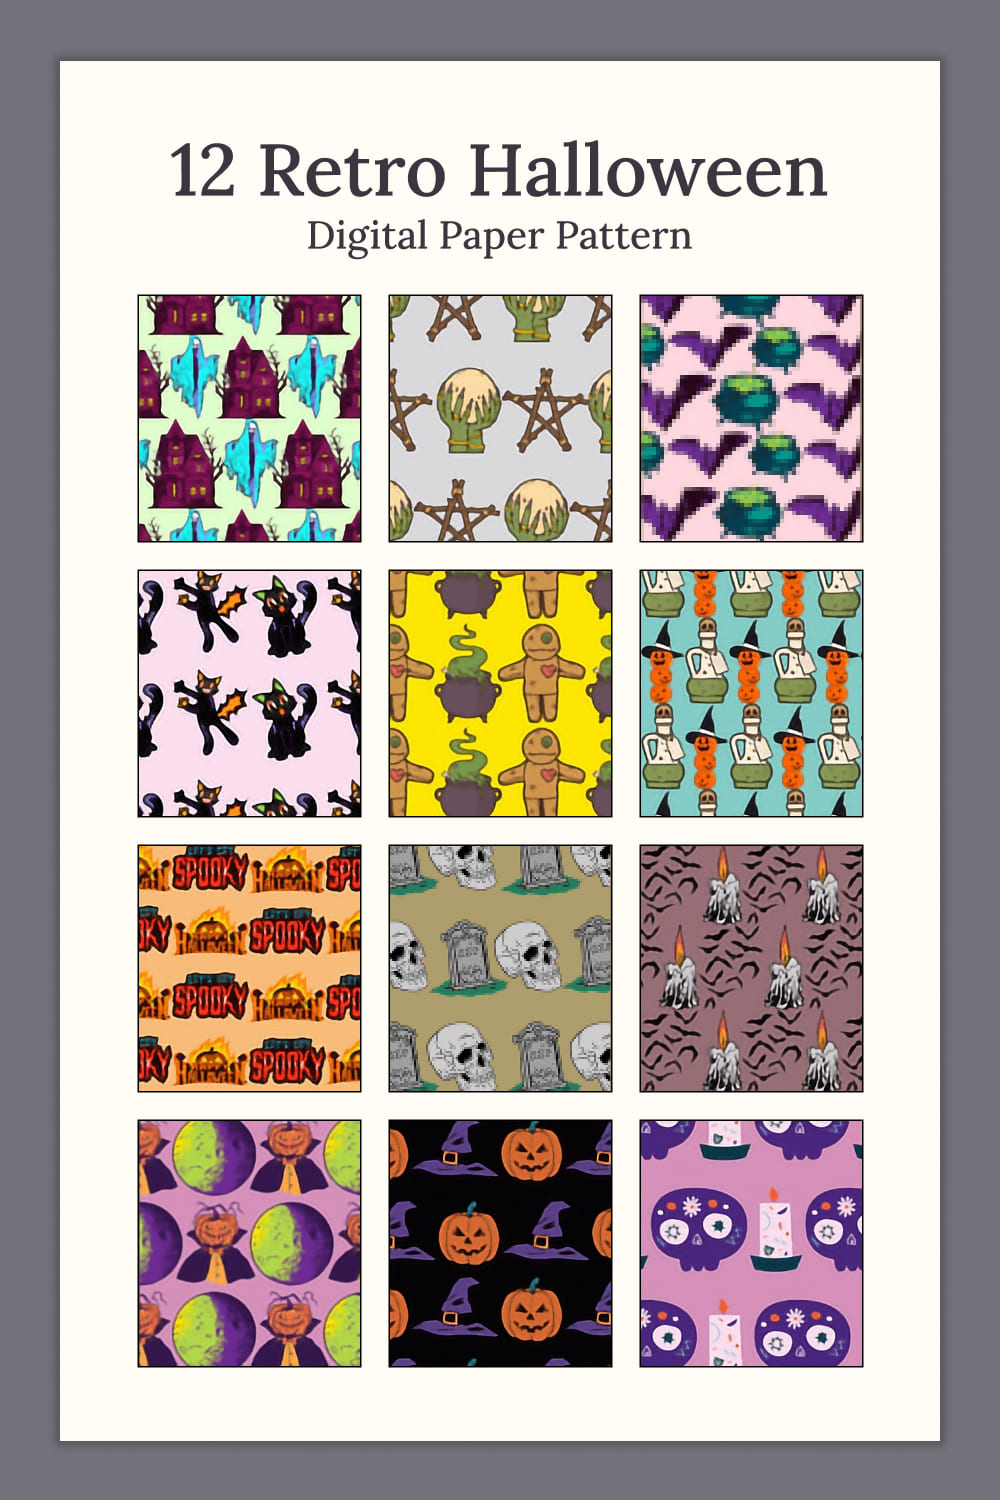 Collection of wonderful paper retro patterns for halloween theme.